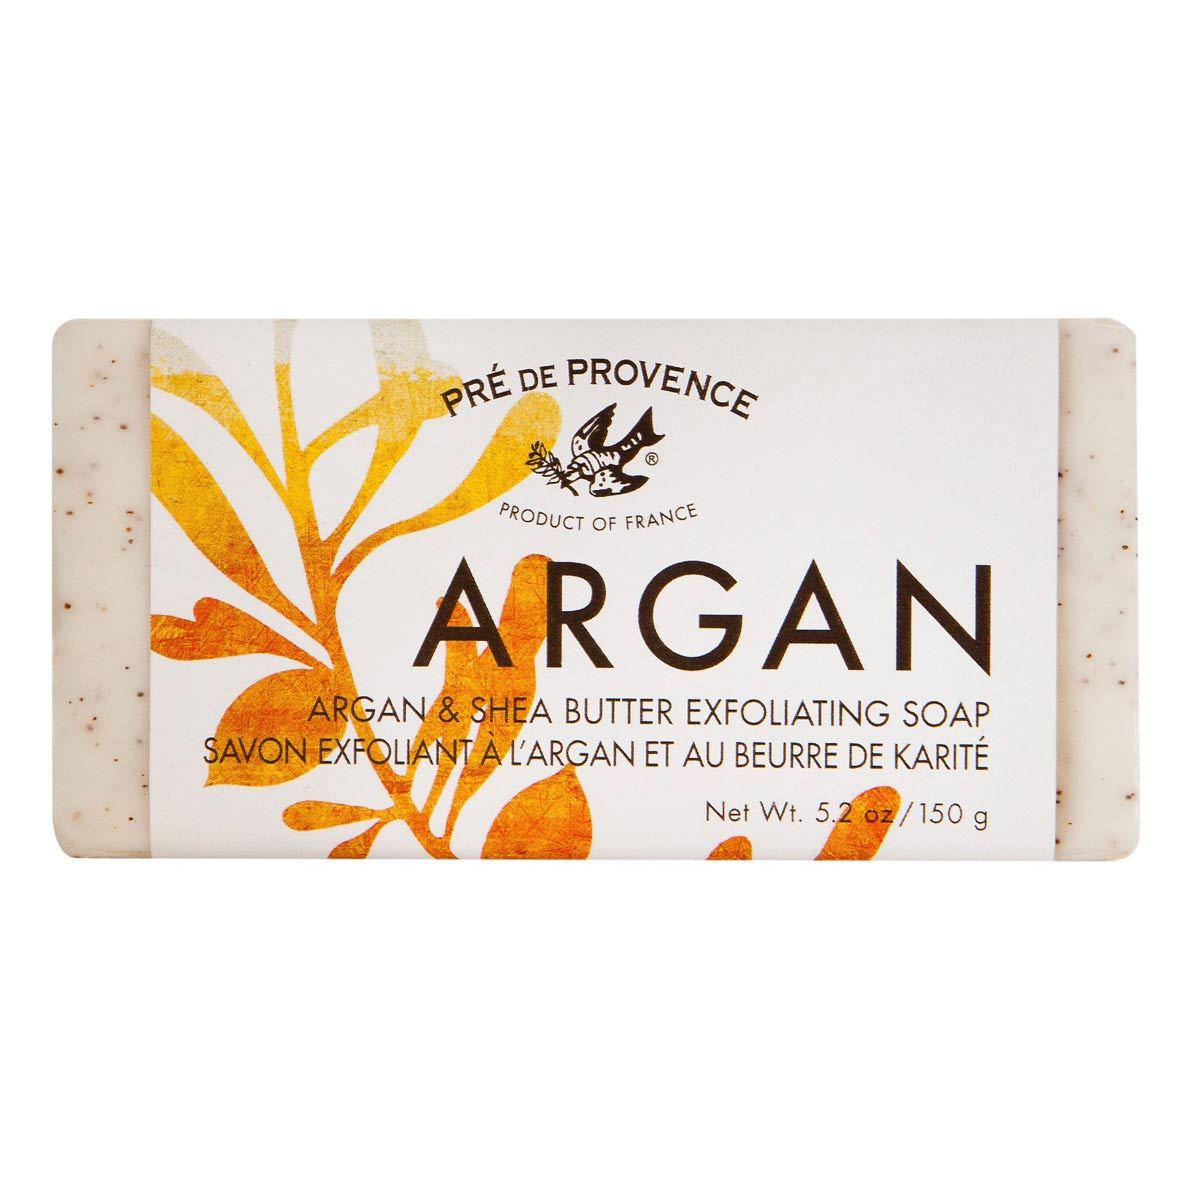 Primary image of Argan Shea Butter Exfoliating Soap